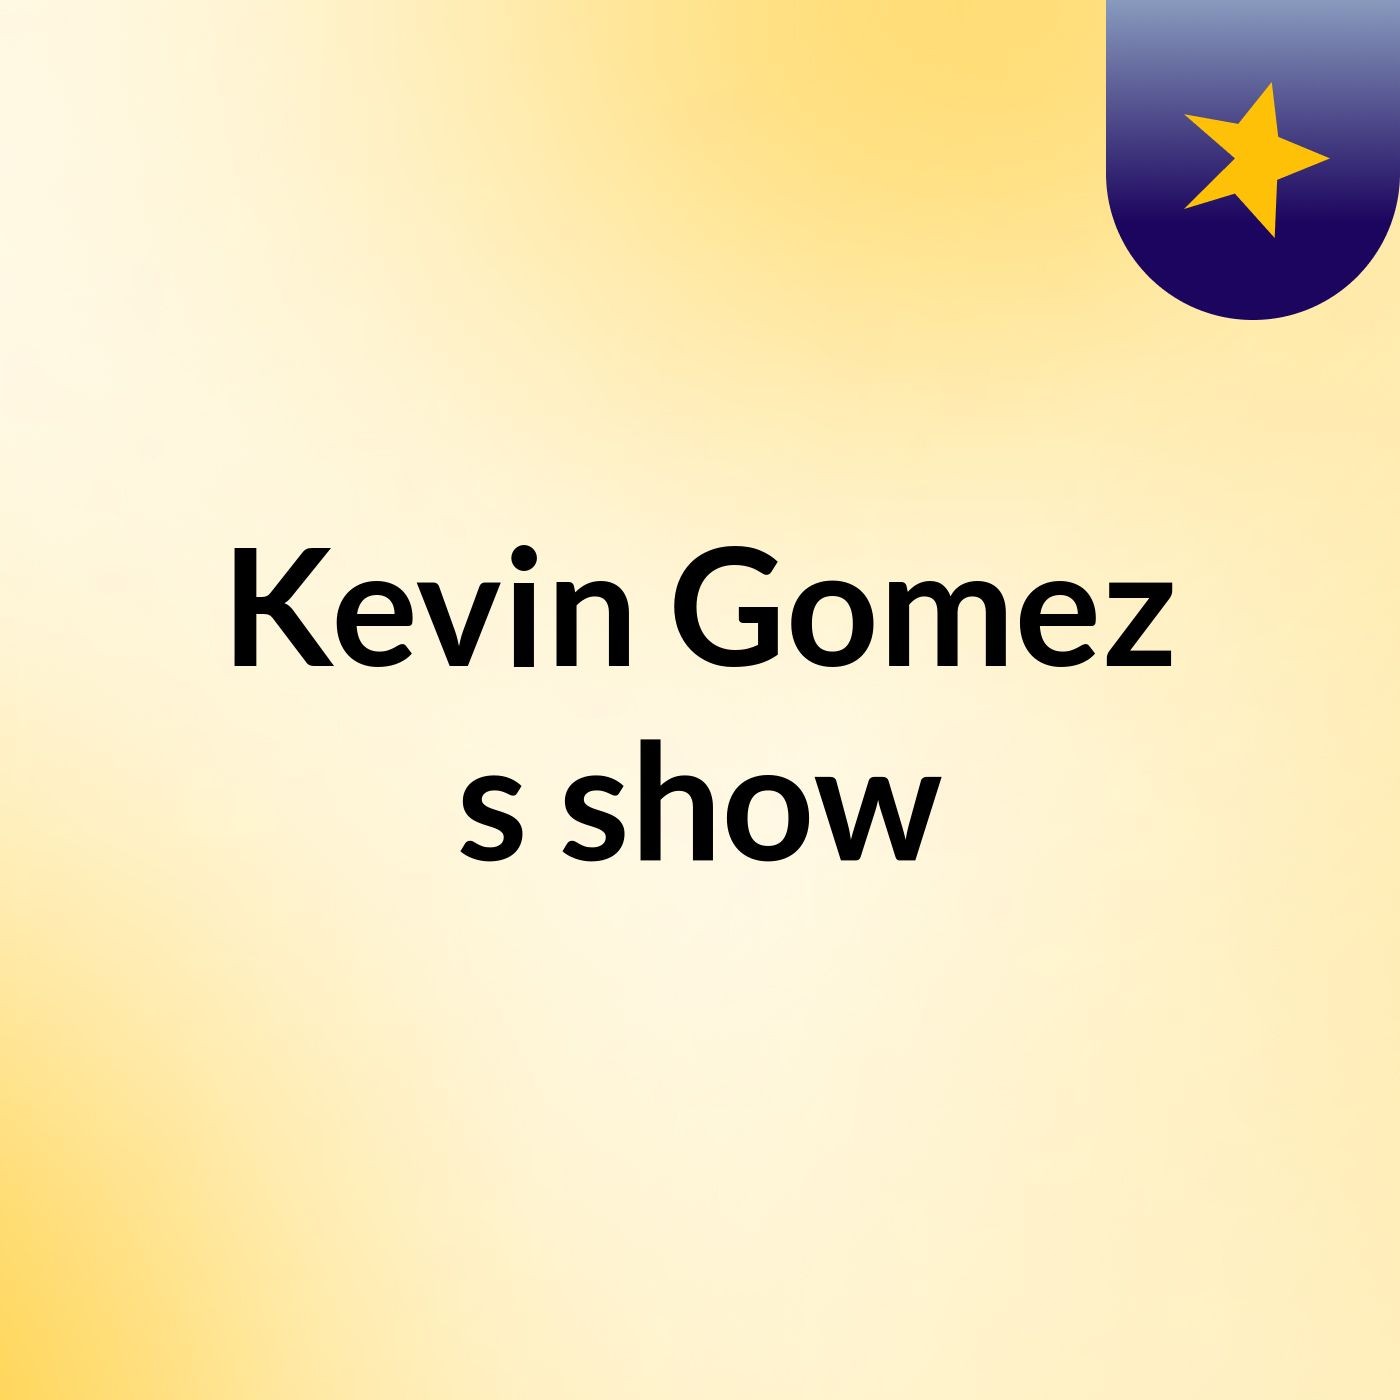 Kevin Gomez's show